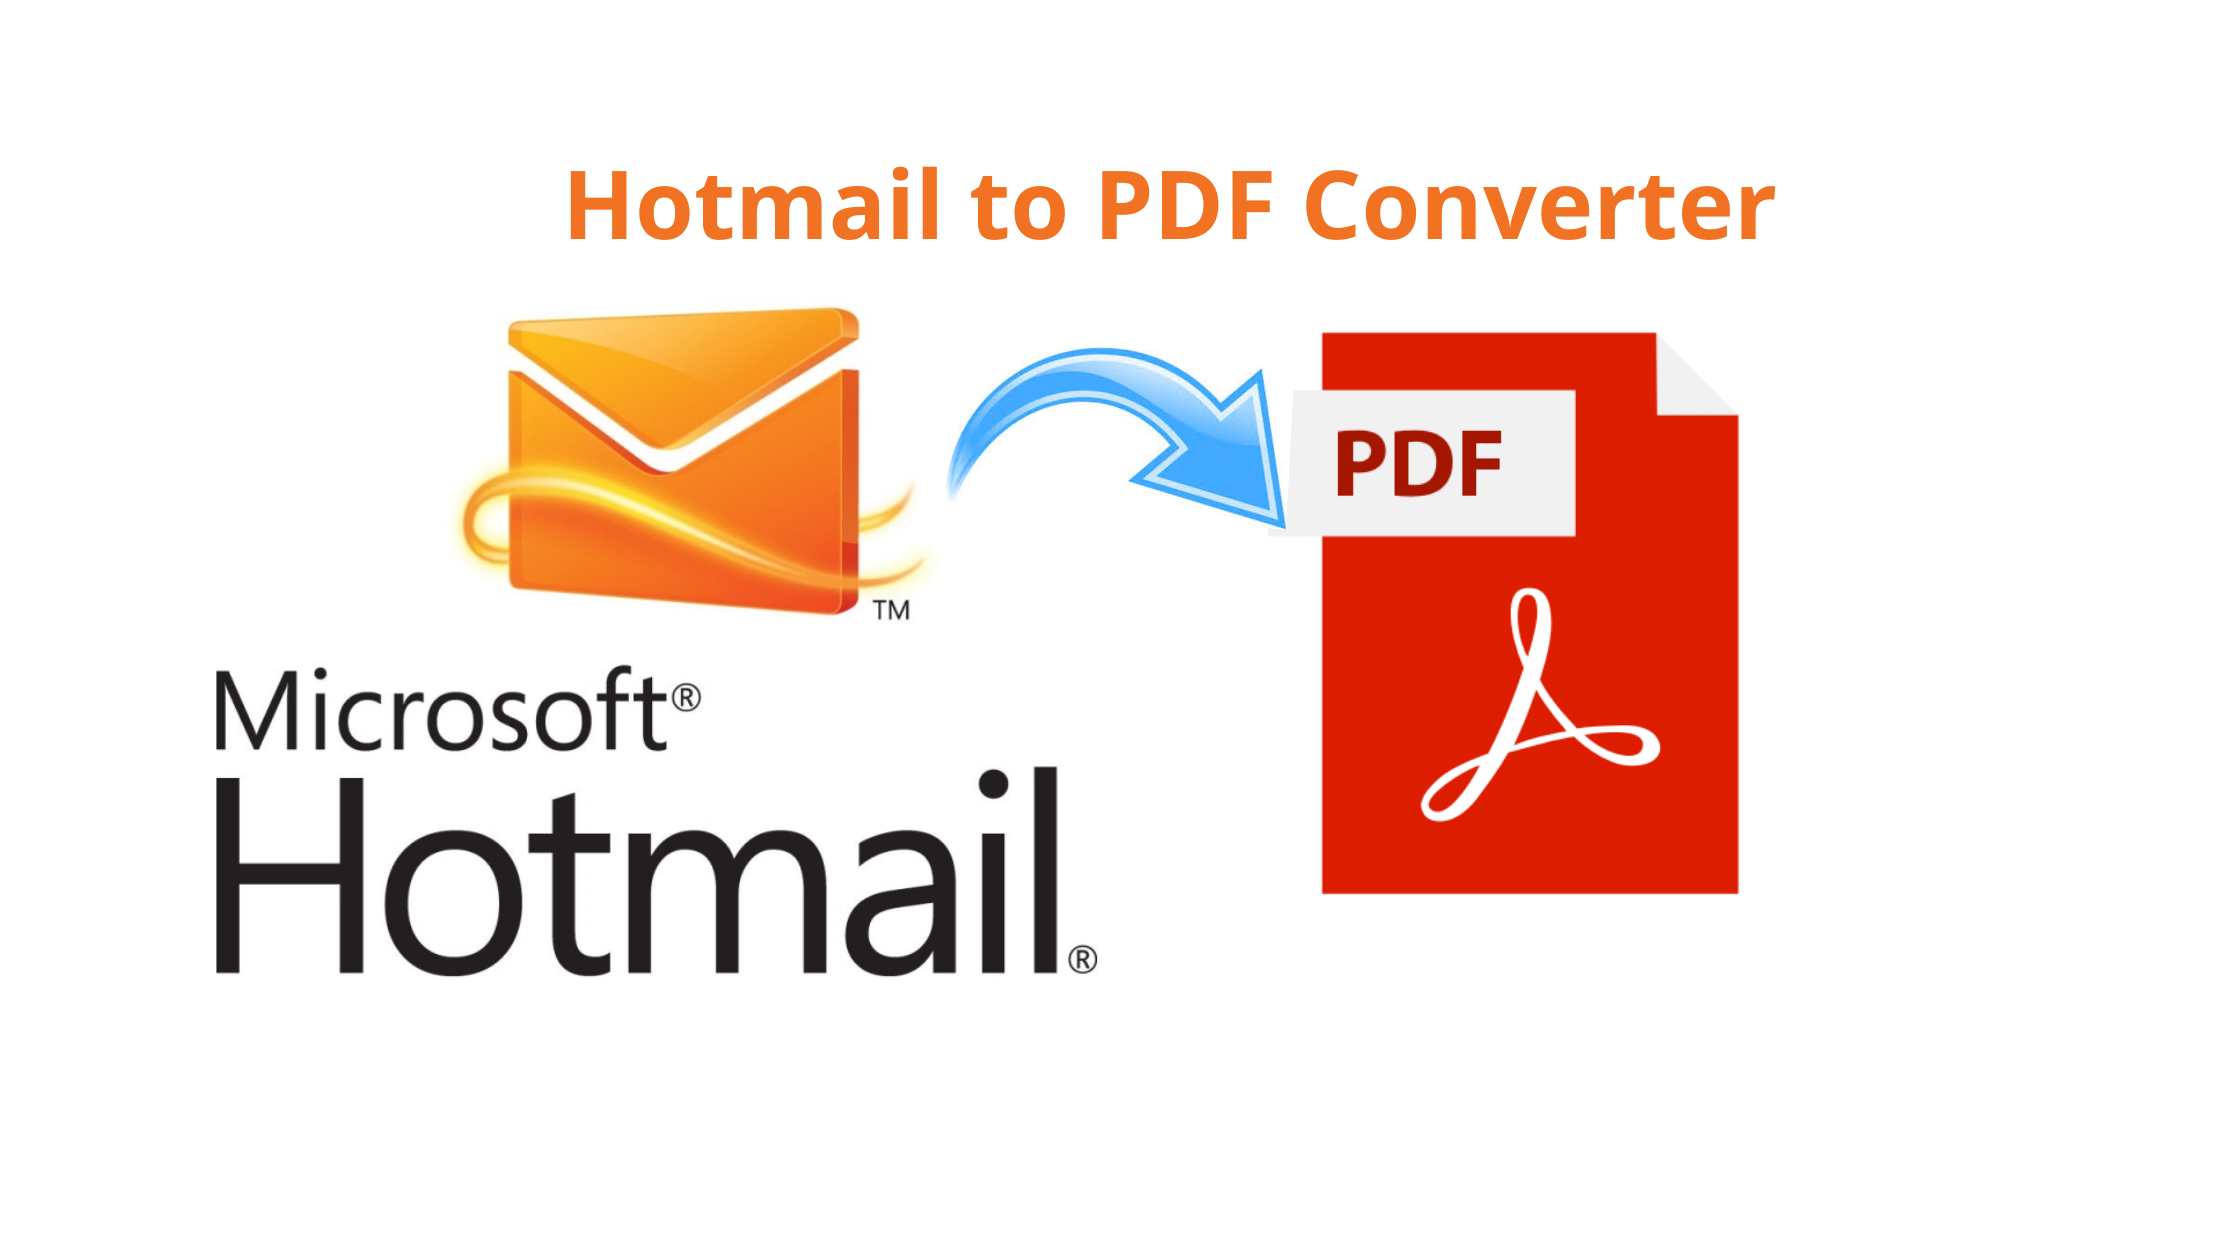 Hotmail to PDF converter